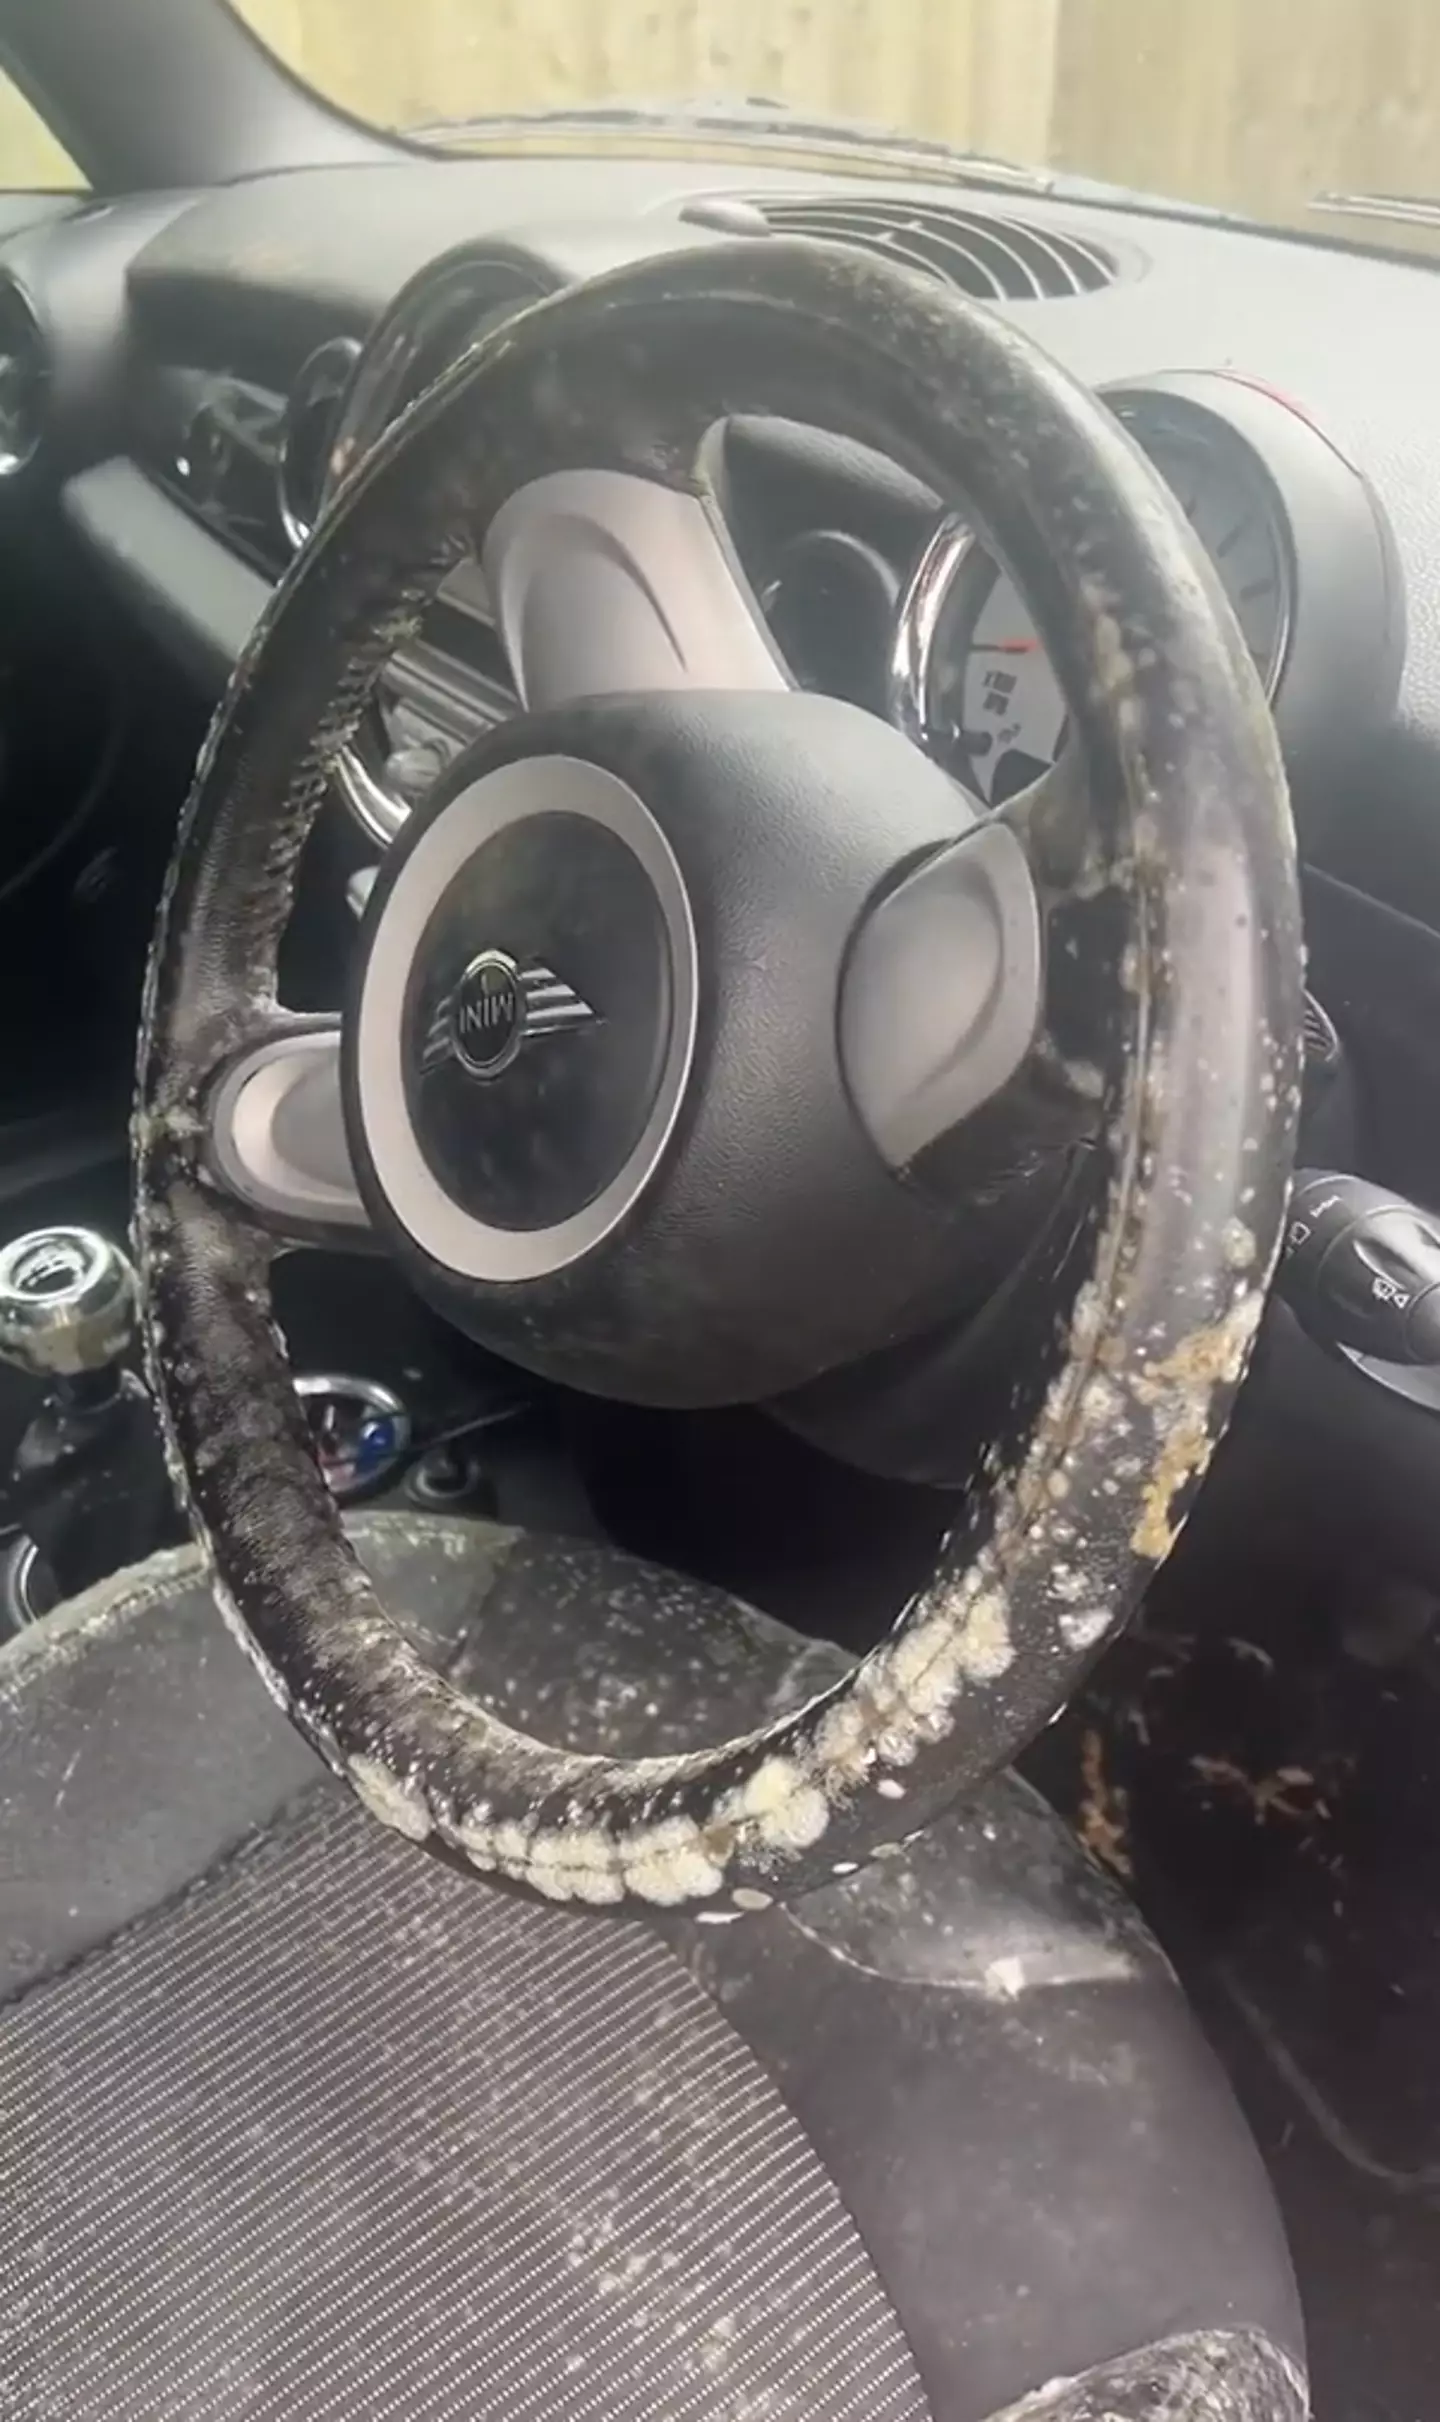 A woman was horrified after discovering the interior of her car was covered in thick mould.